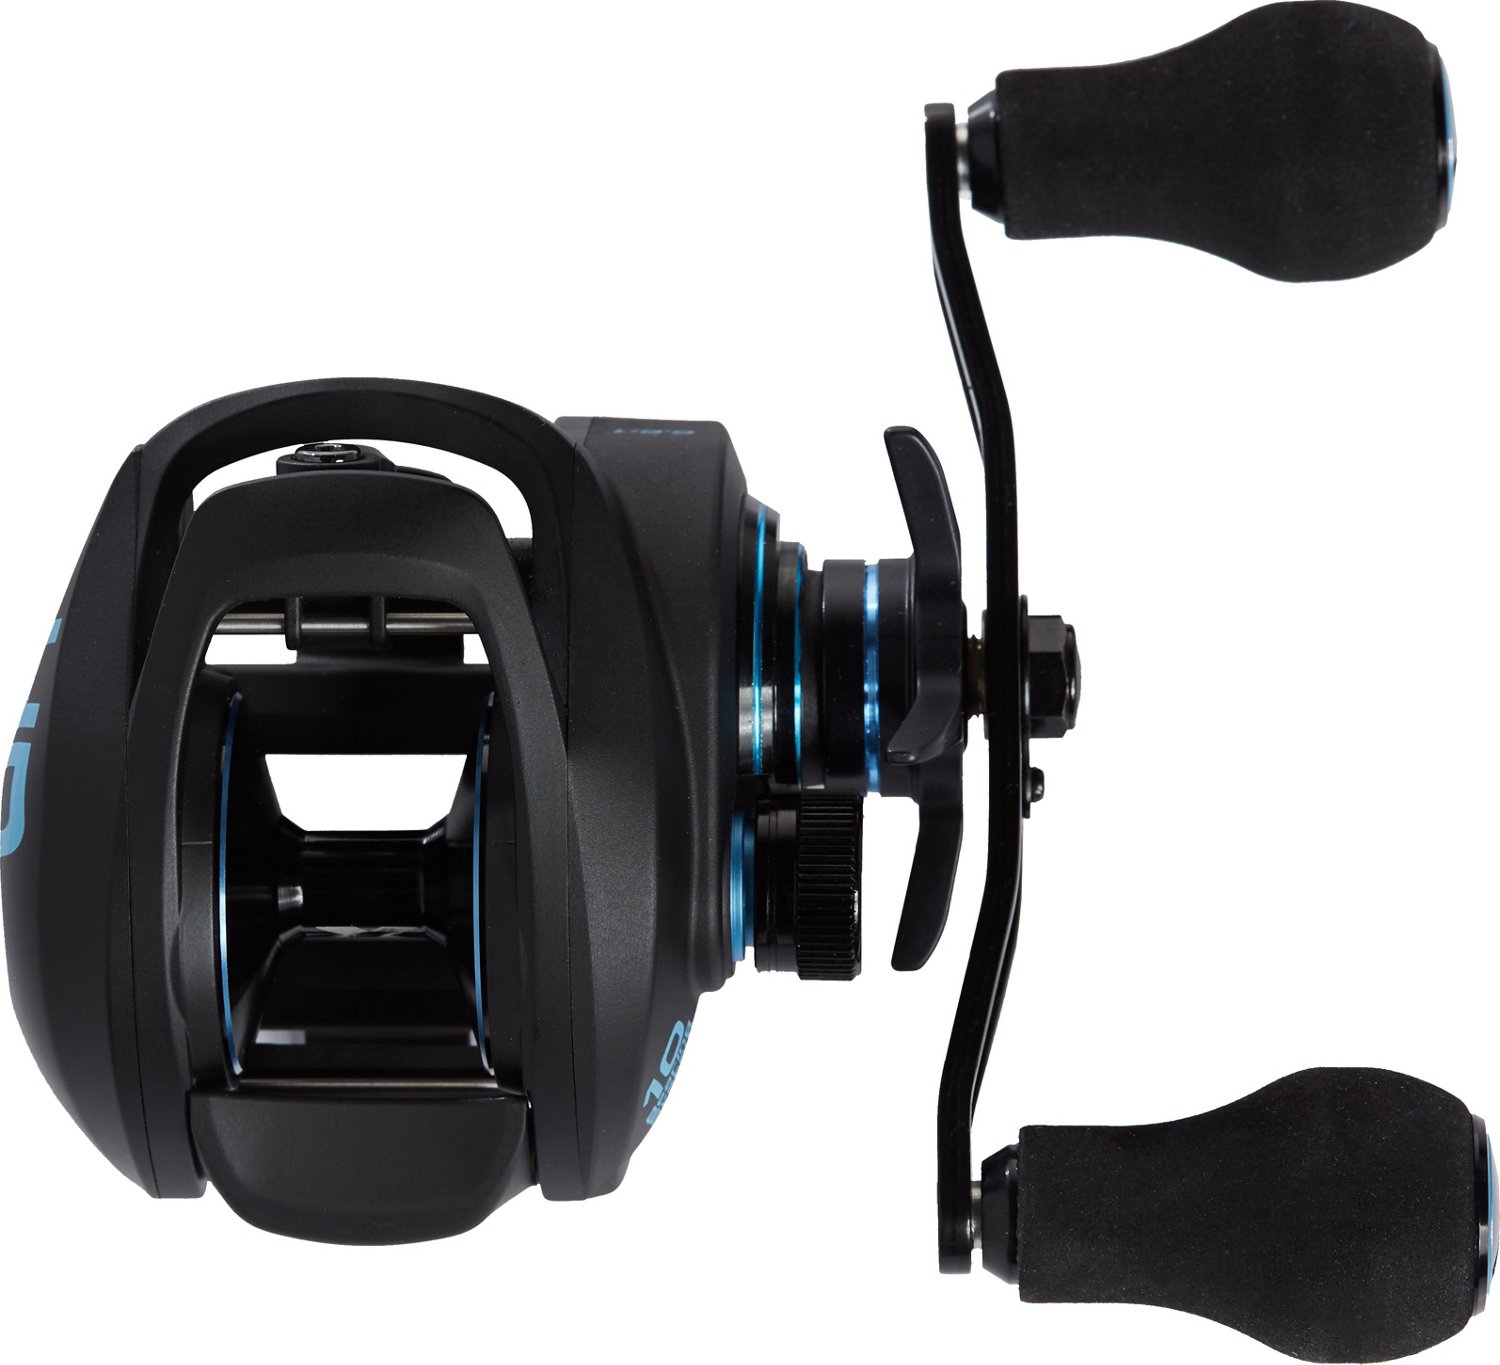 Academy H2OX ETHOS Baitcaster Review - Wired2Fish